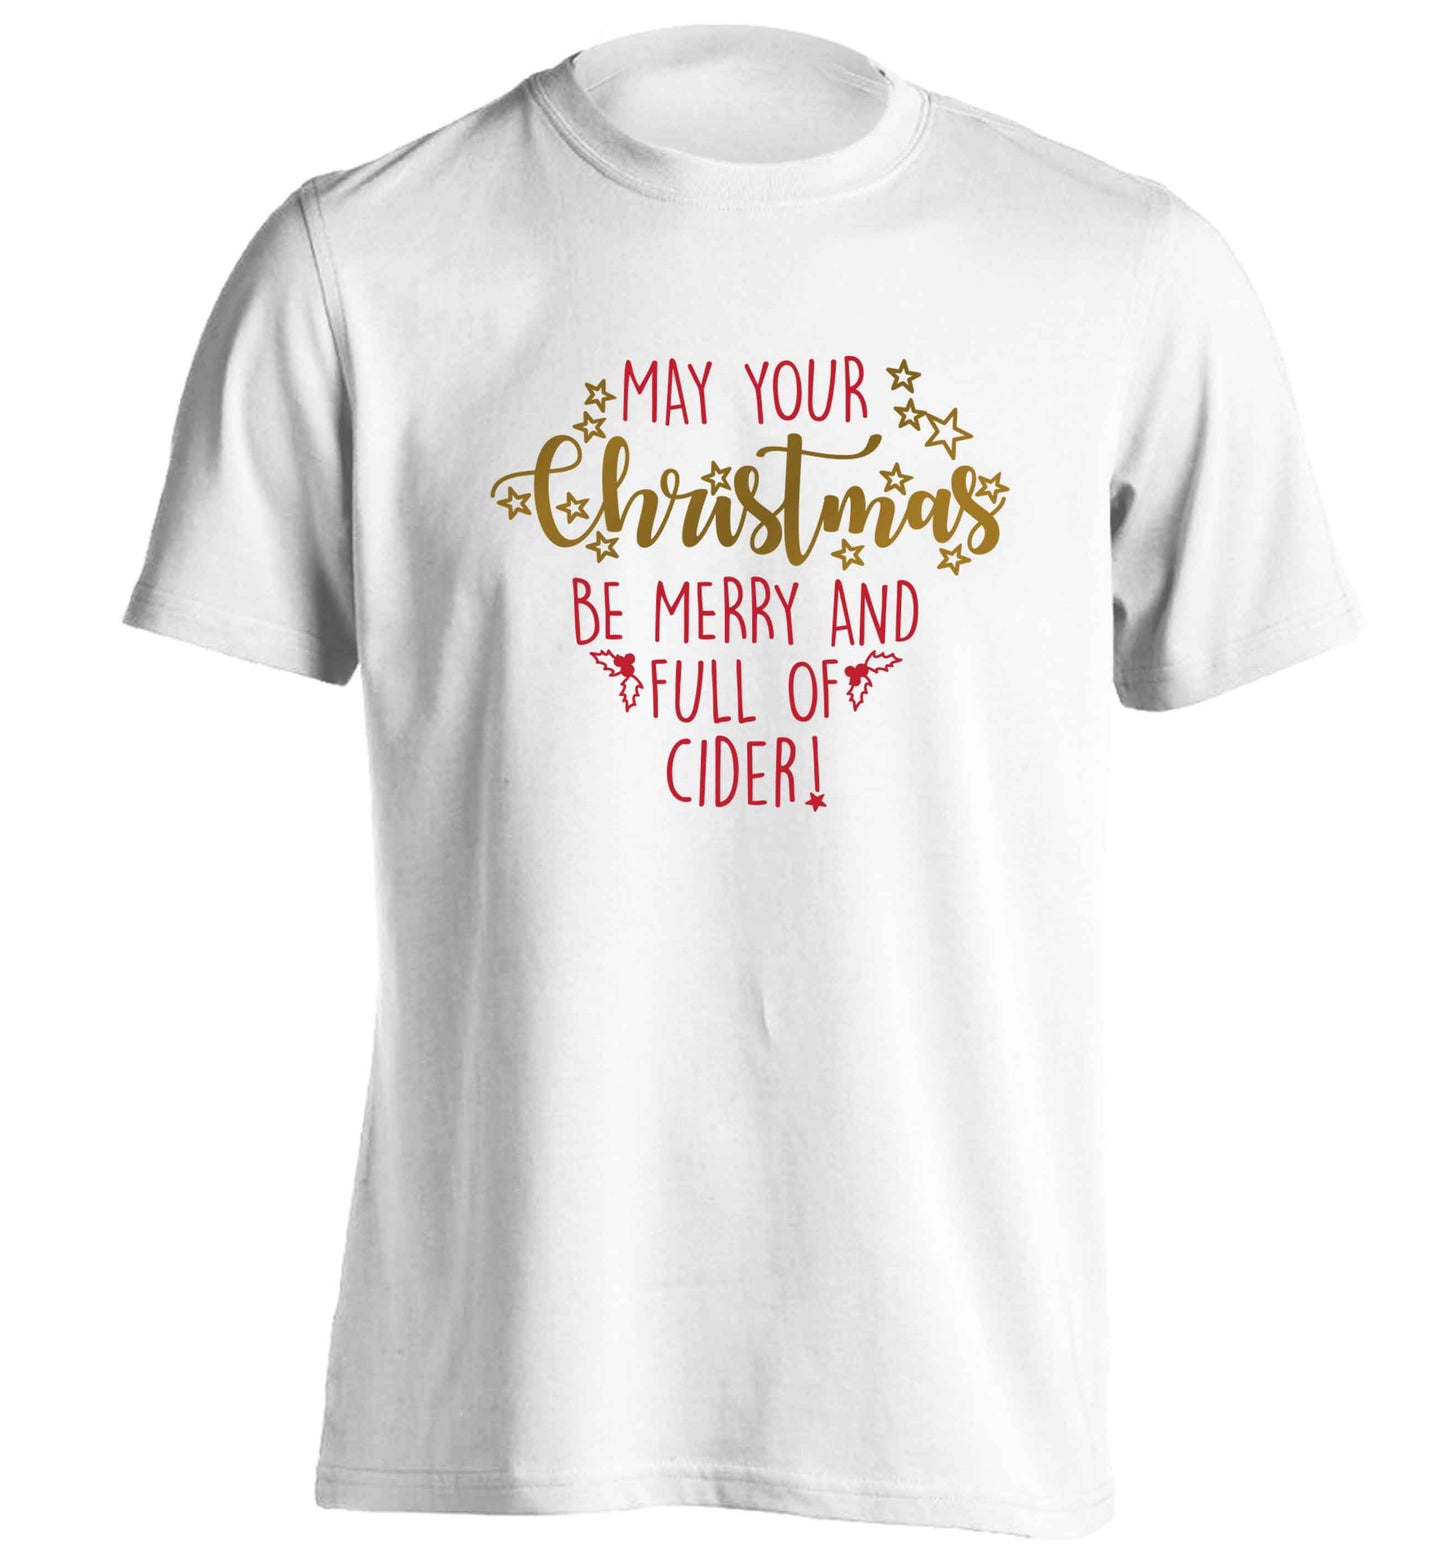 May your Christmas be merry and full of cider adults unisex white Tshirt 2XL